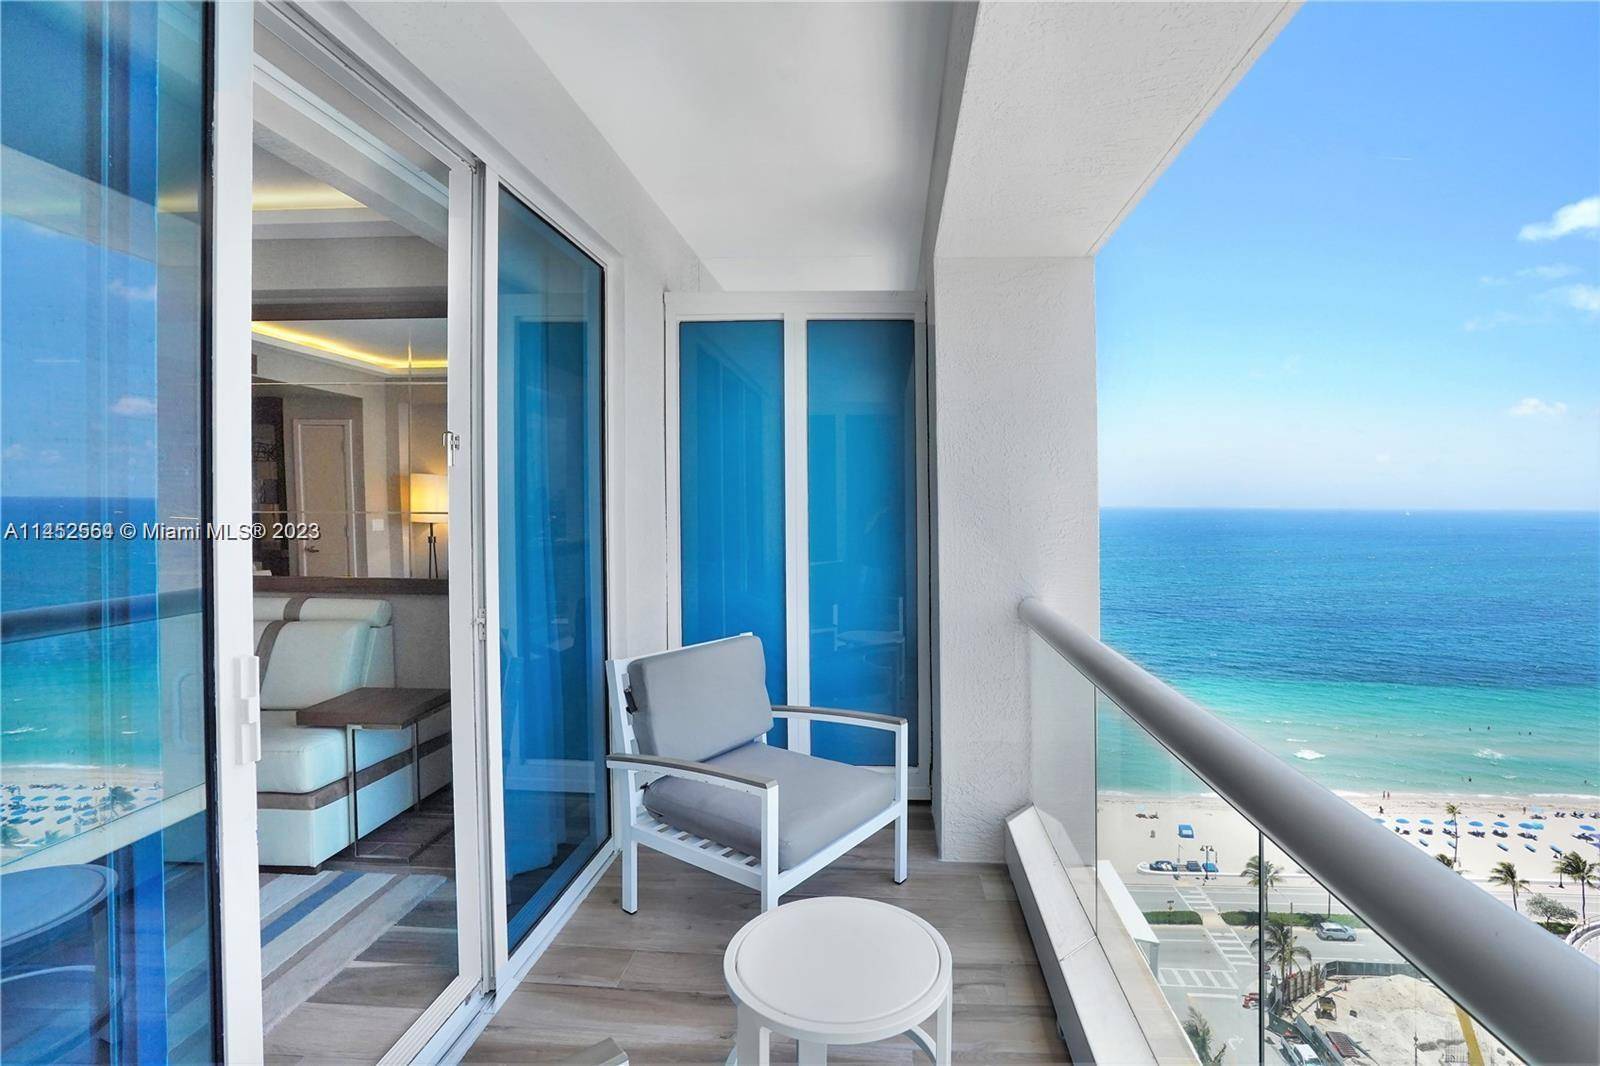 Discover unparalleled resort style living at The Ocean Resort Residences Fort Lauderdale Beach.